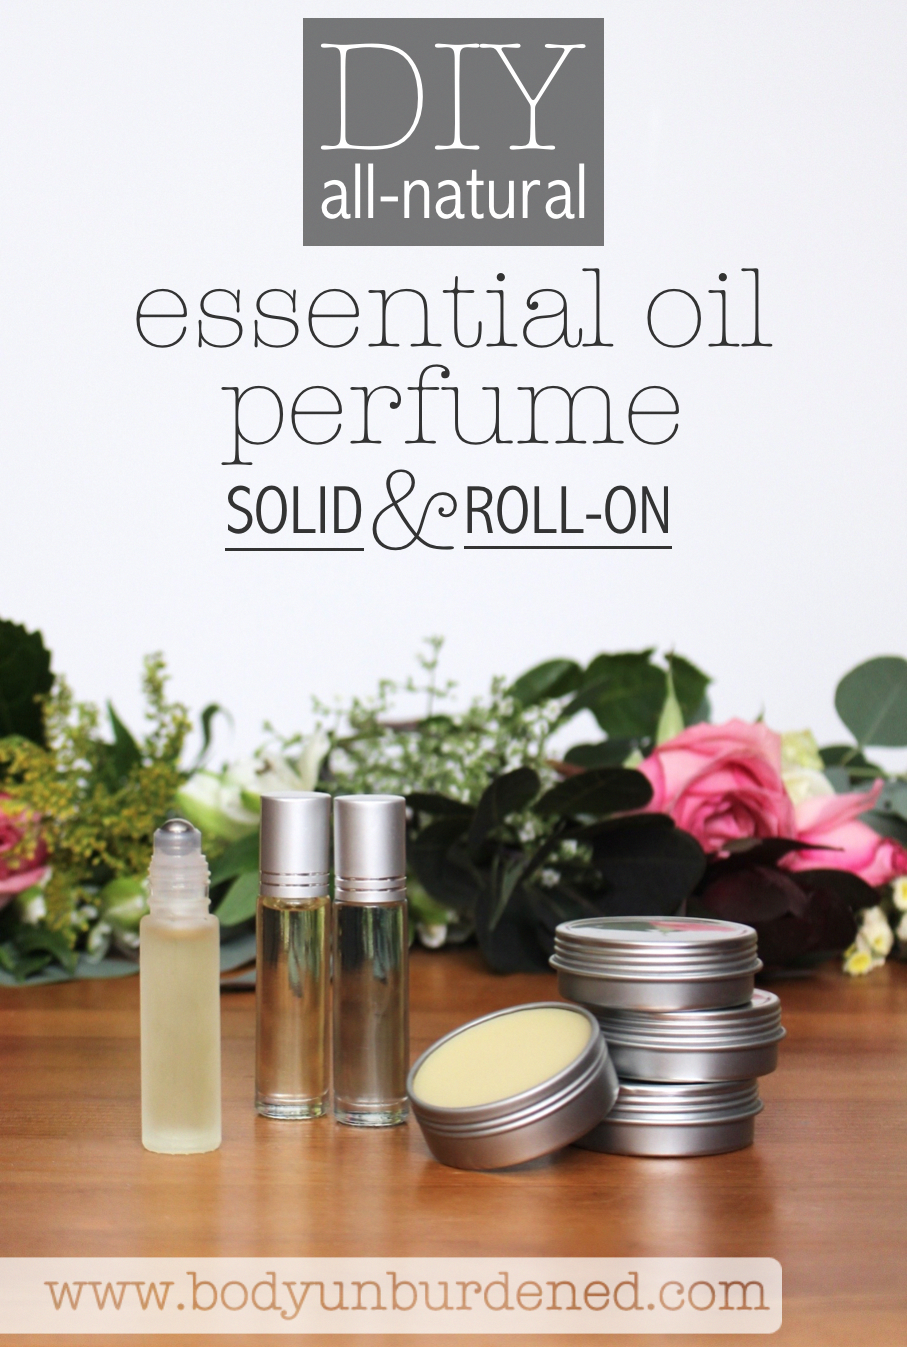 DIY Essential Oil Perfume 2 Ways: Solid and Roll-On - DIY Essential Oil Perfume 2 Ways: Solid and Roll-On -   18 beauty DIY natural ideas